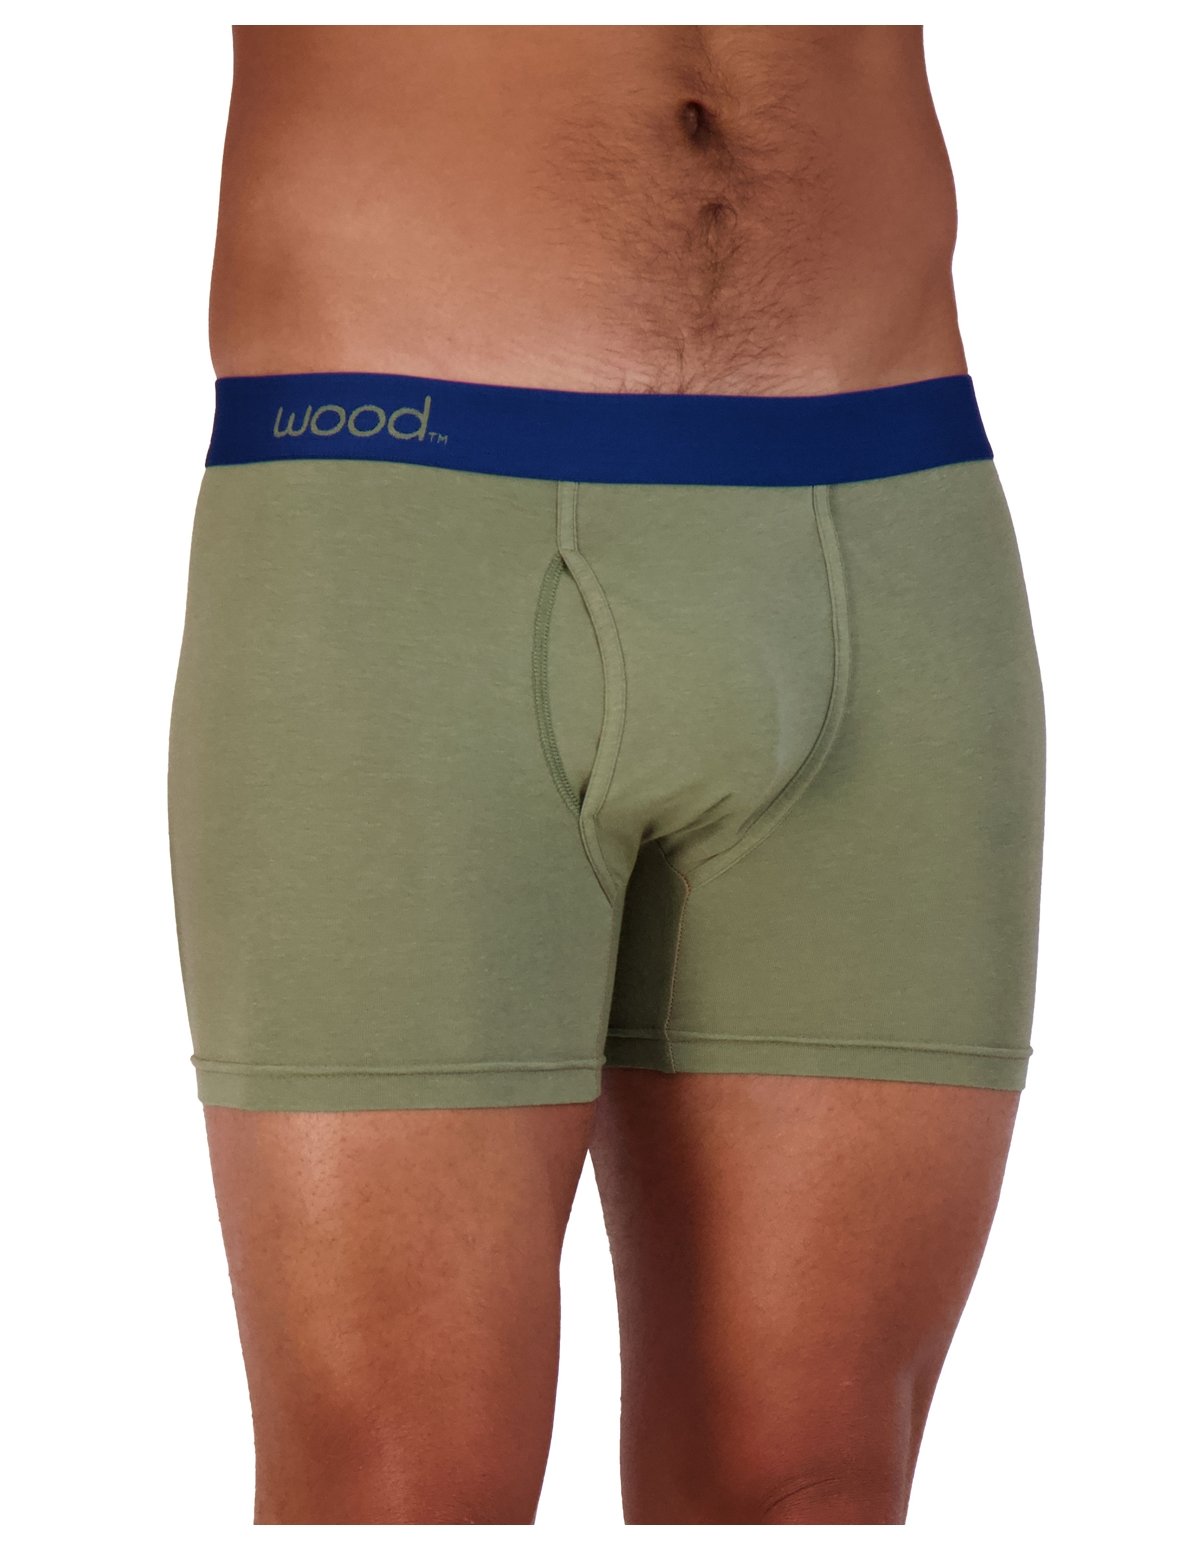 alternate image for Wood Boxer Brief W/ Fly - Olive